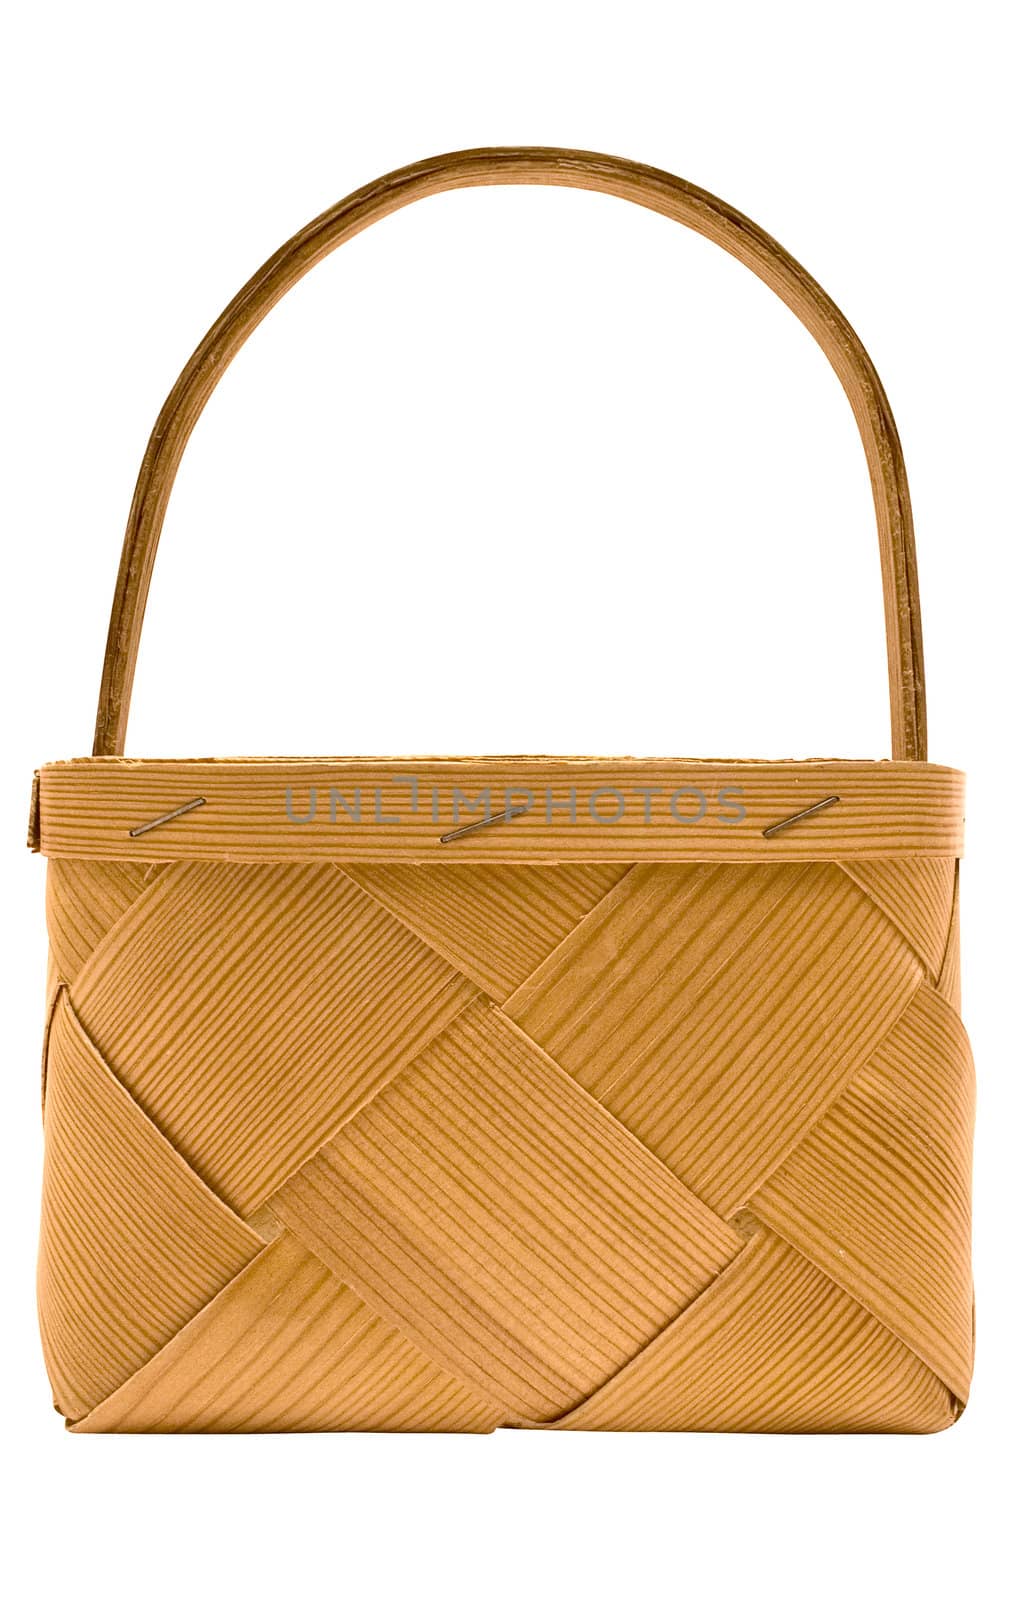 Woven Wooden Basket with Clipping Path by winterling